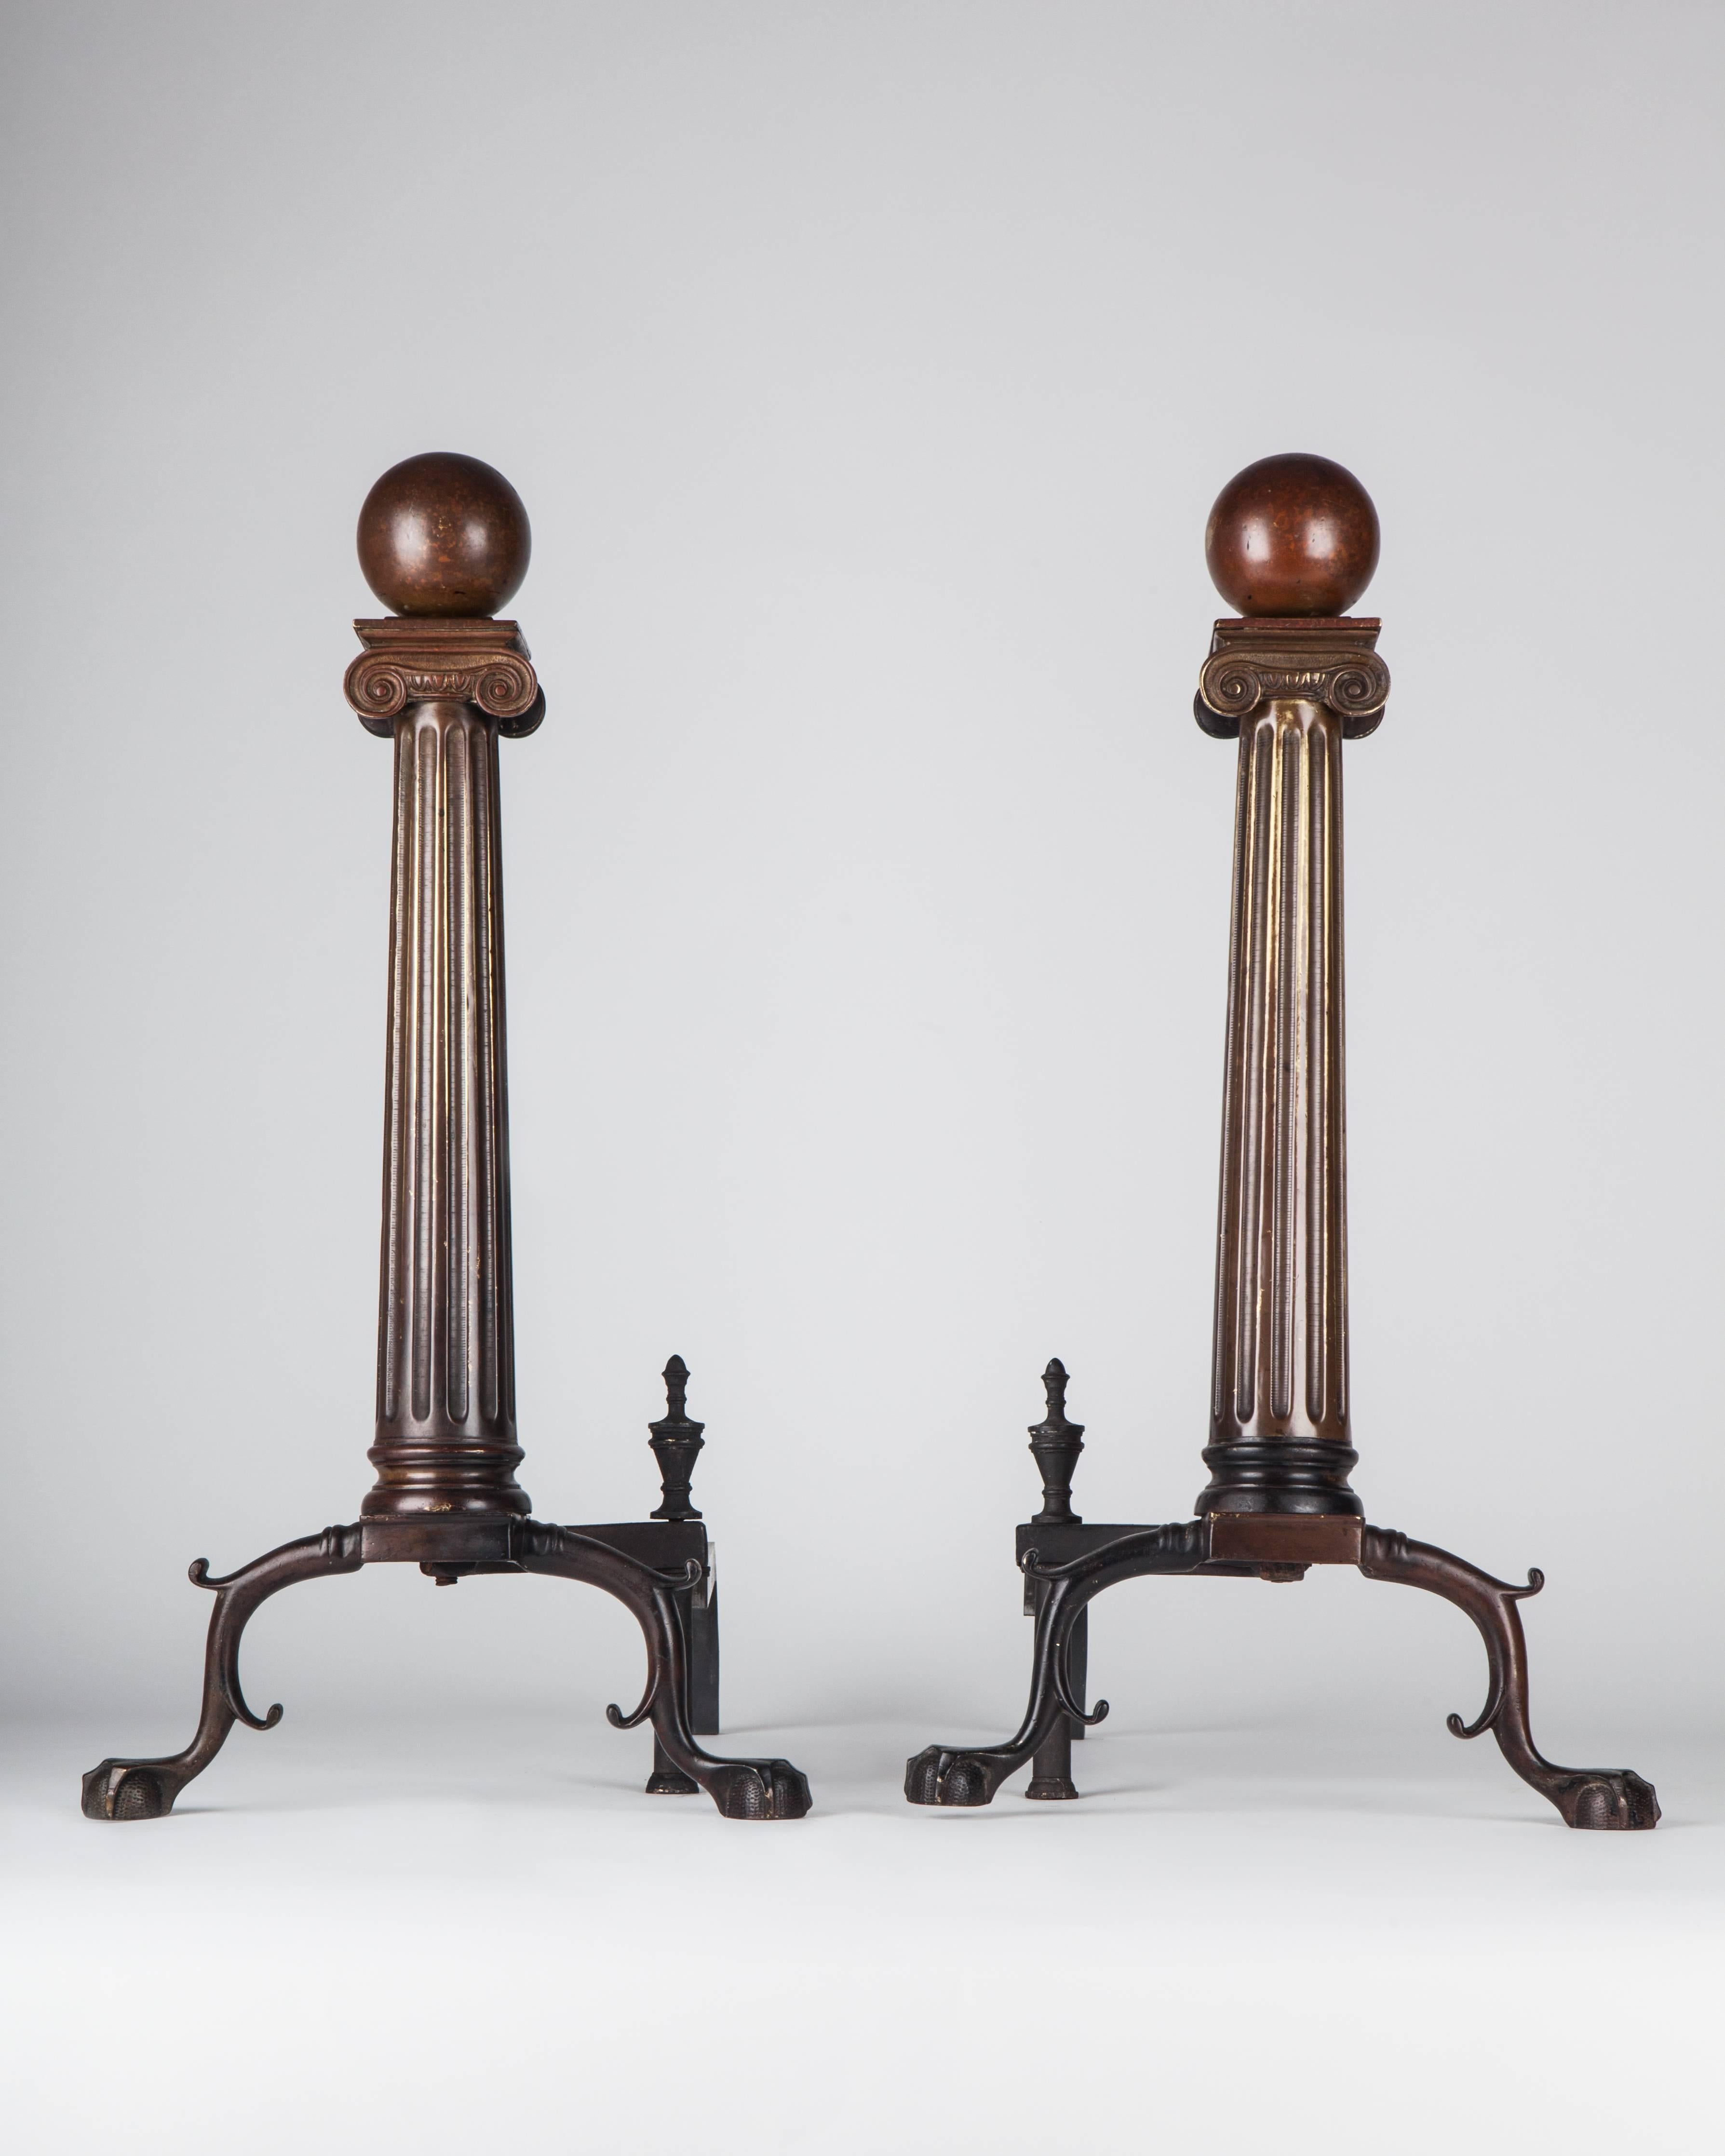 AFP0542
A pair of neoclassical ionic column-form andirons in their wonderful, original dark ruddy finish.

Dimensions:
Overall: 22